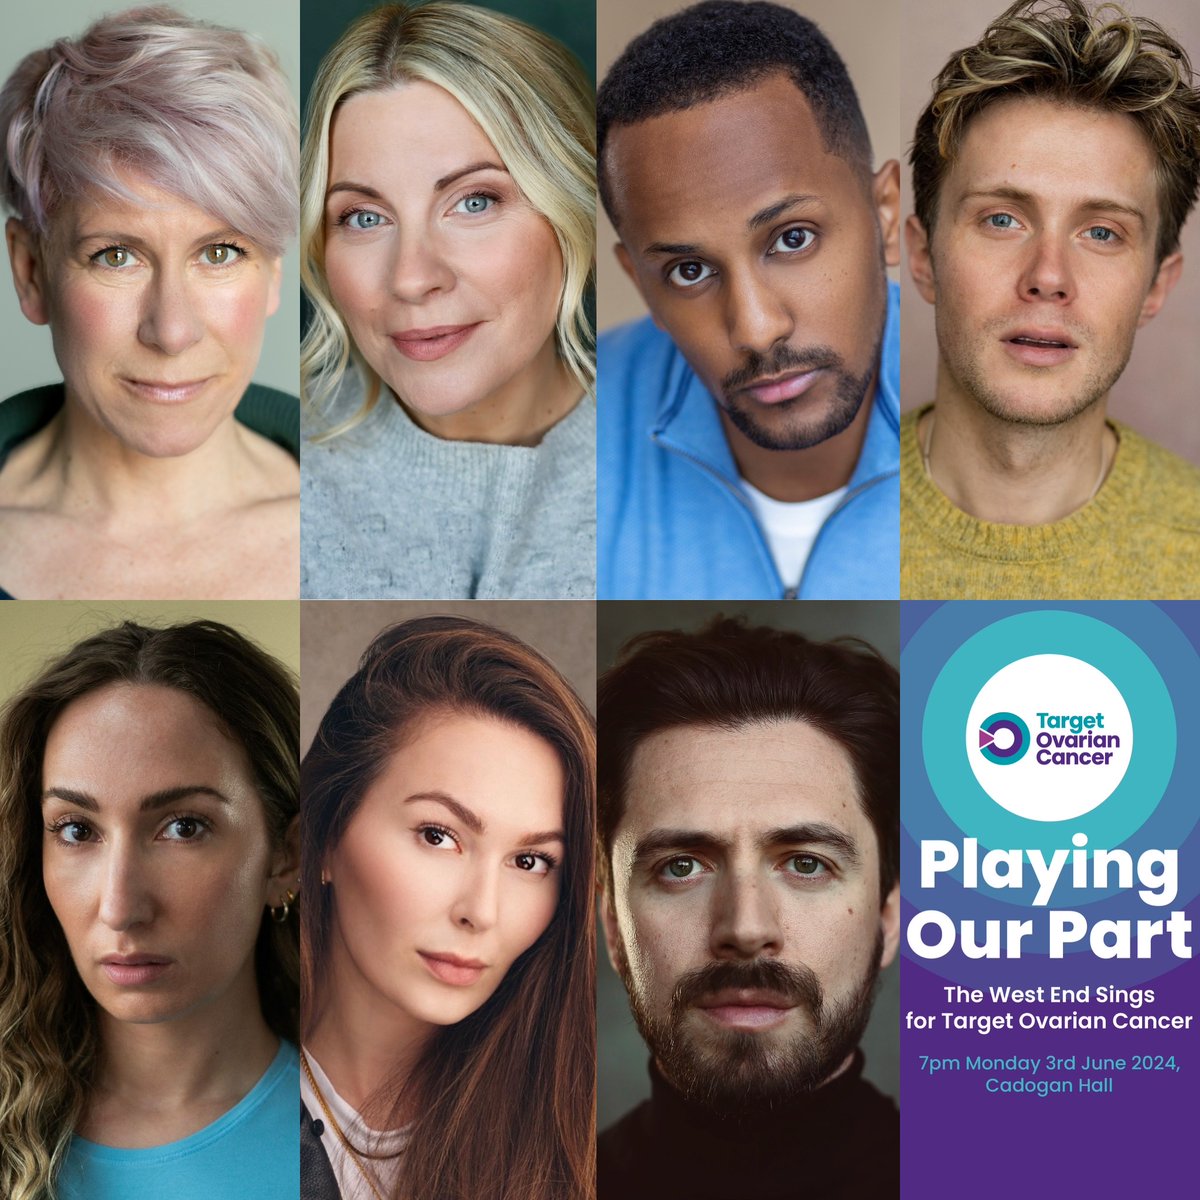 #AnnaJaneCasey joins @LouiseDearman @AhmedAAHamad @robhouchen @emkingston @KellyMathieson & #NadimNaaman as #PlayingOurPart returns to @cadoganhall on 3 Jun. A 15-piece orchestra is conducted by Adam Hoskins This year’s concert is raising funds for @TargetOvarian